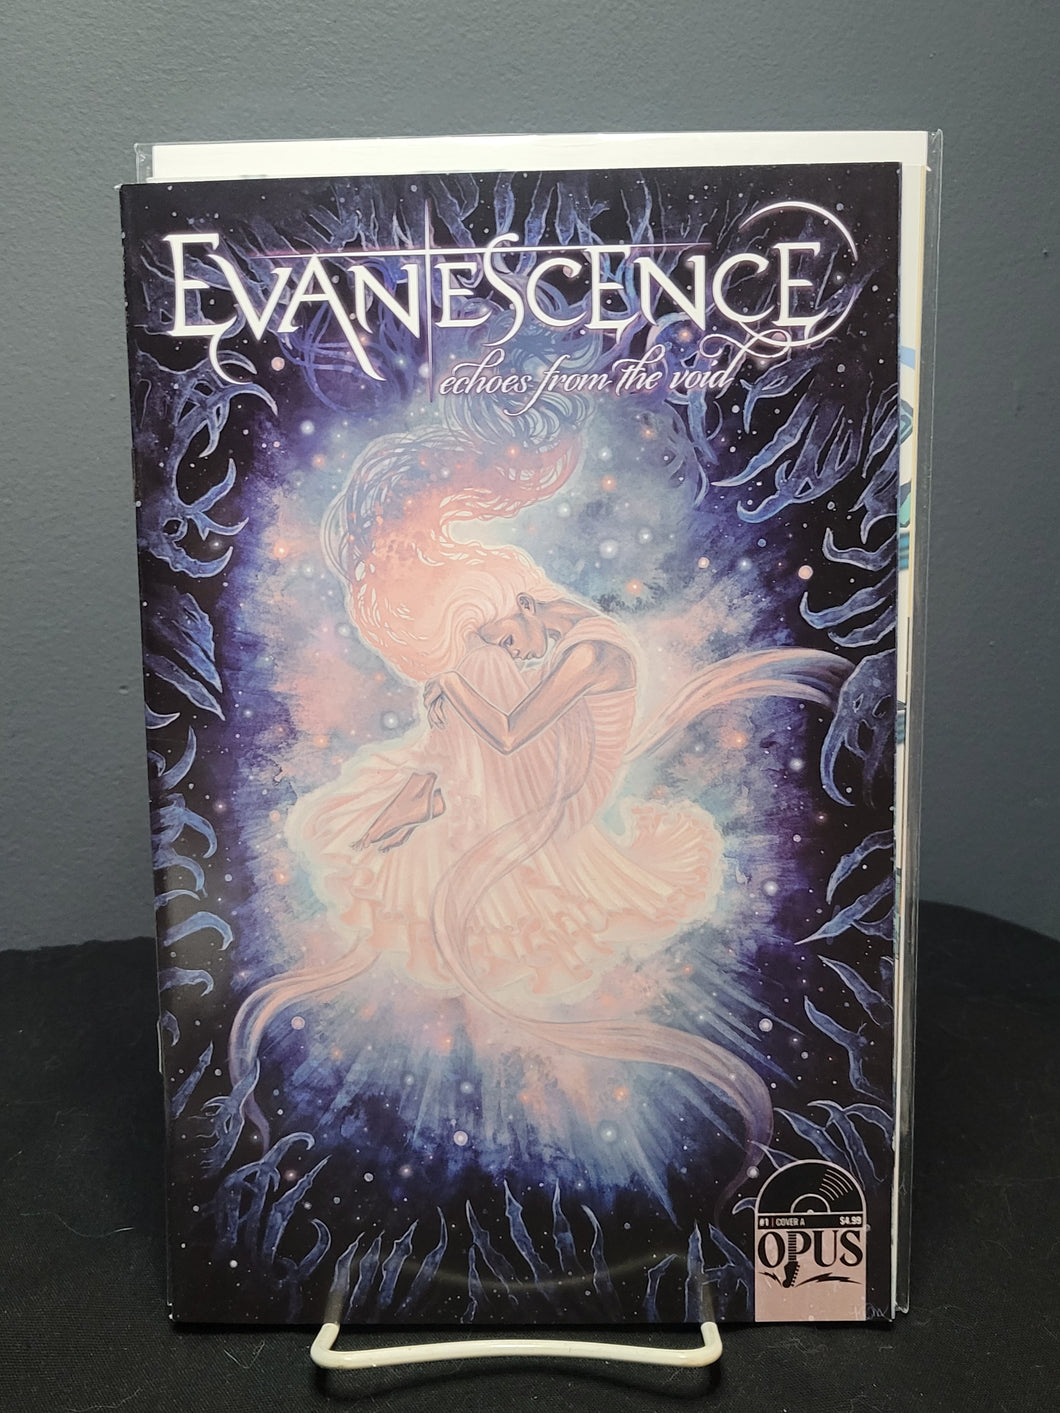 Evanescence Echoes From The Void #1